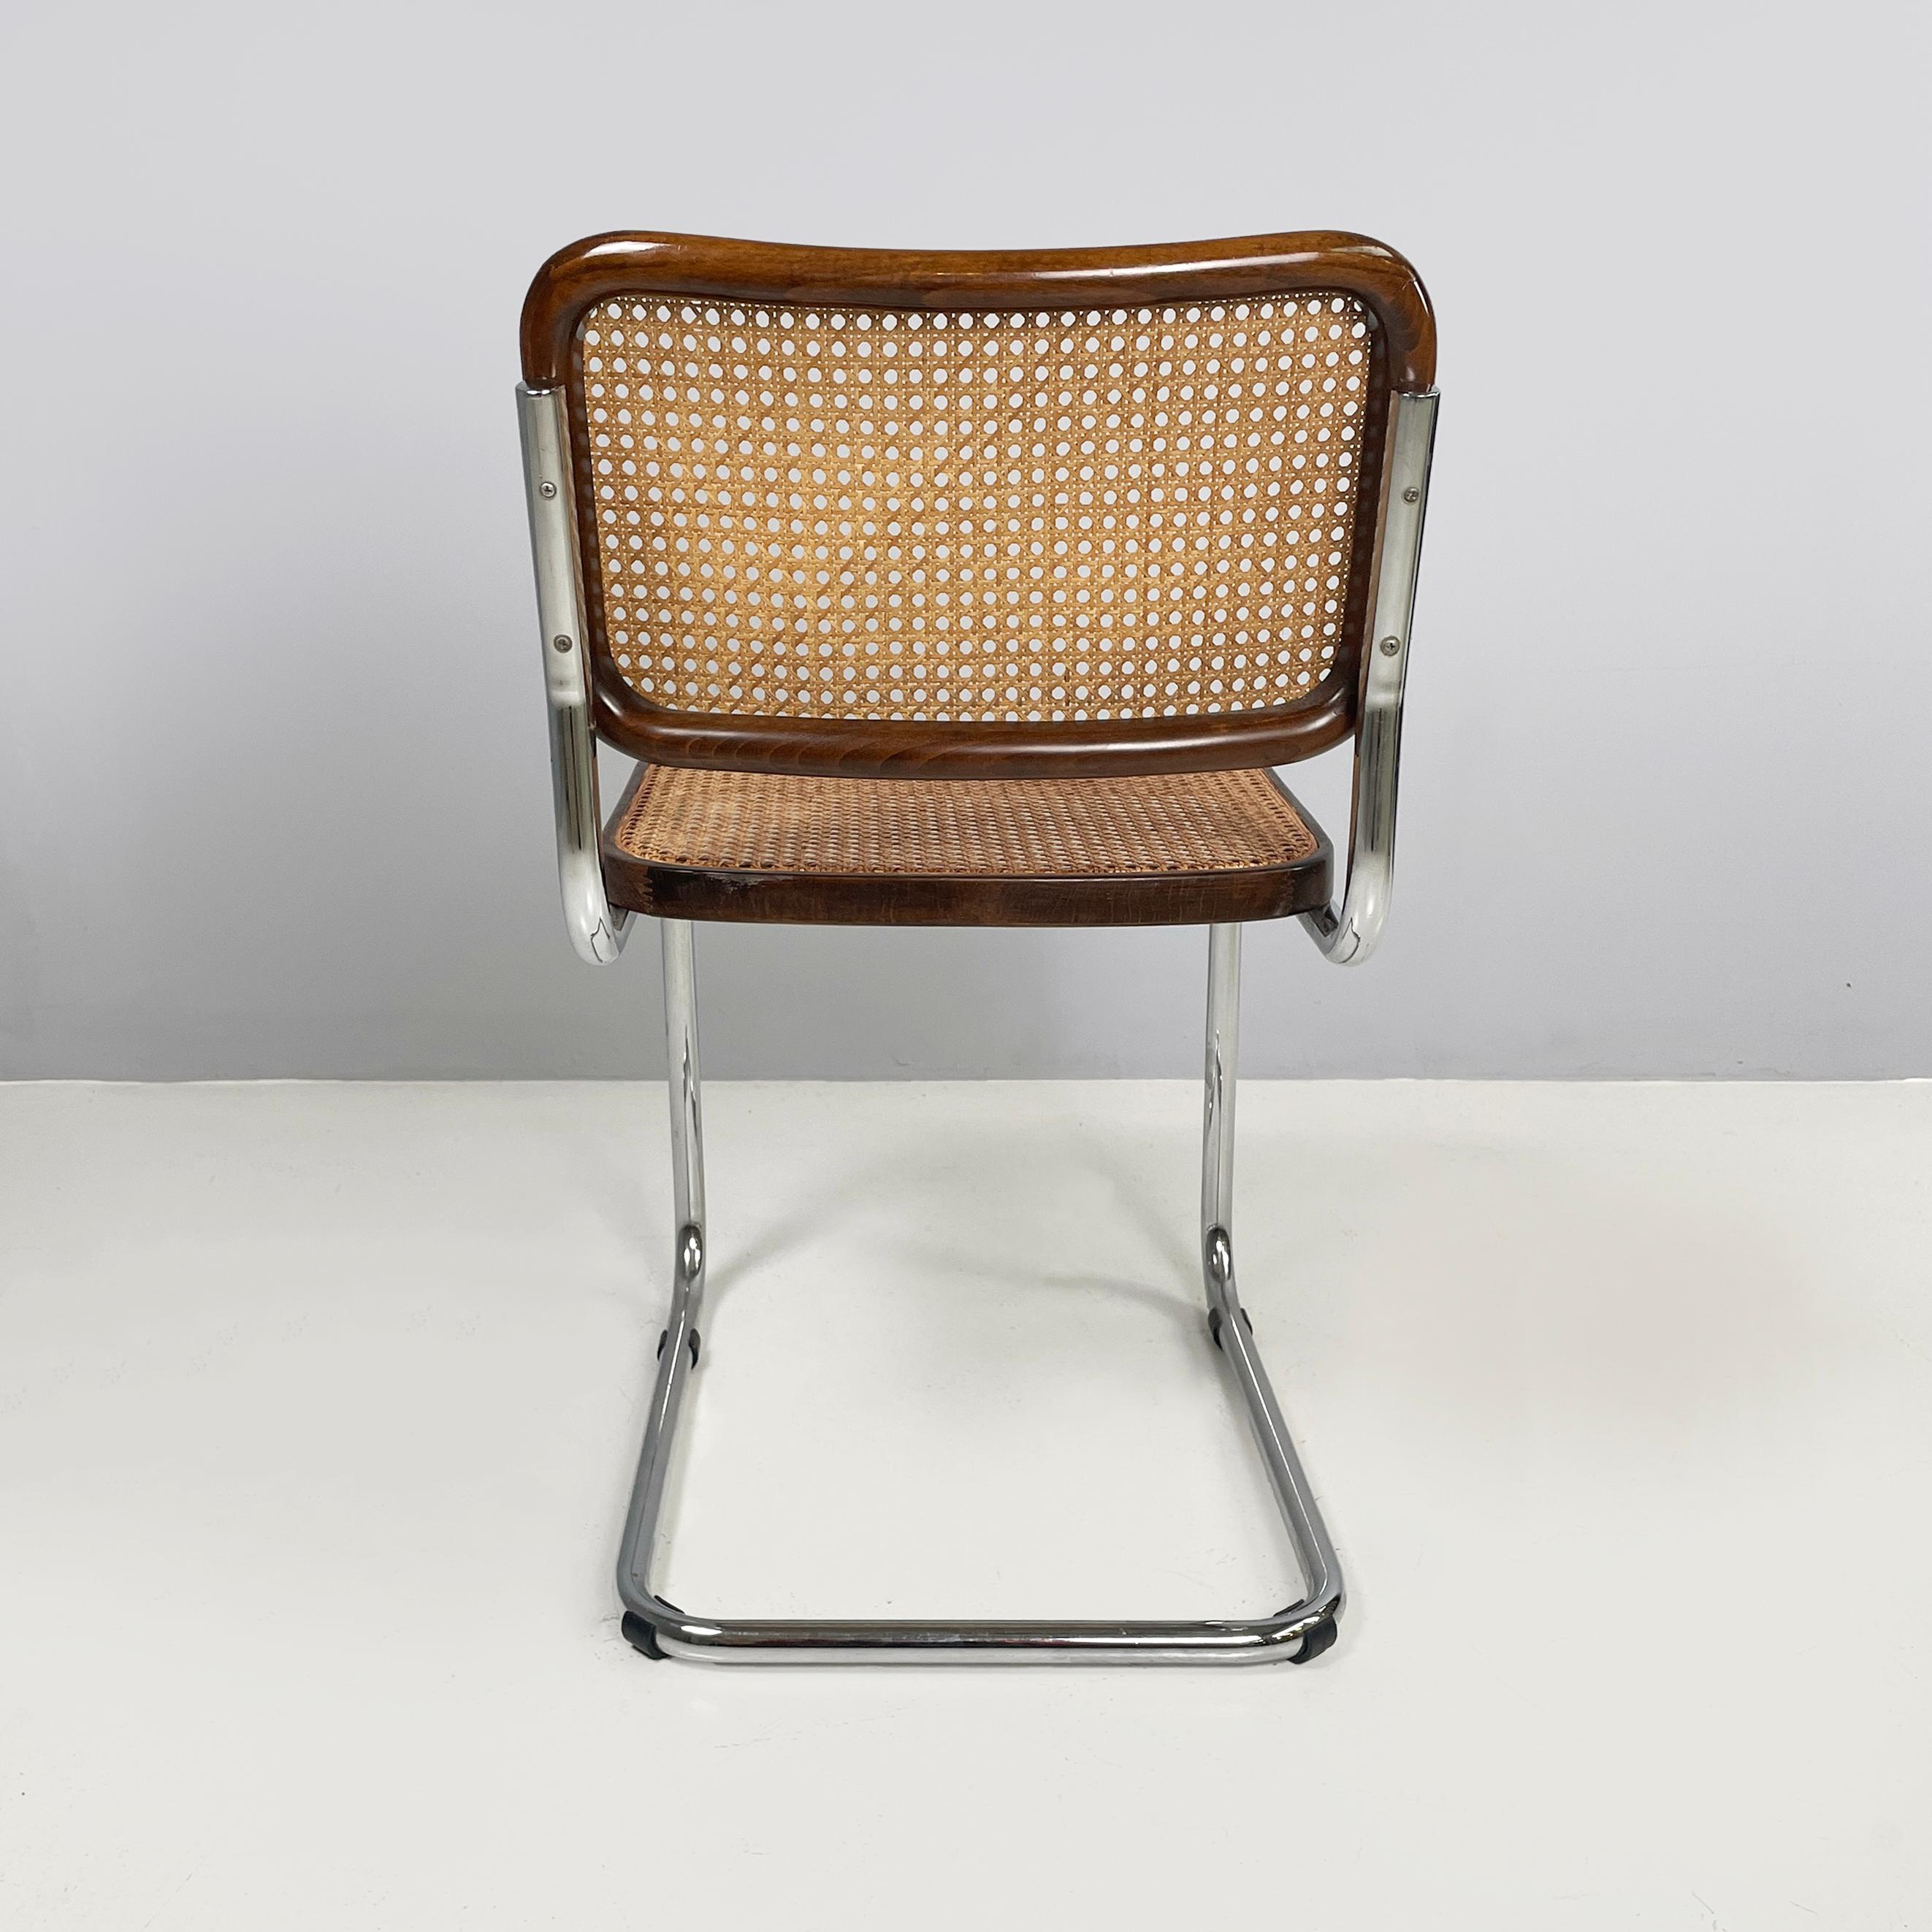 Mid-20th Century Italian mid-century modern Chair in straw, wood and steel, 1960s For Sale